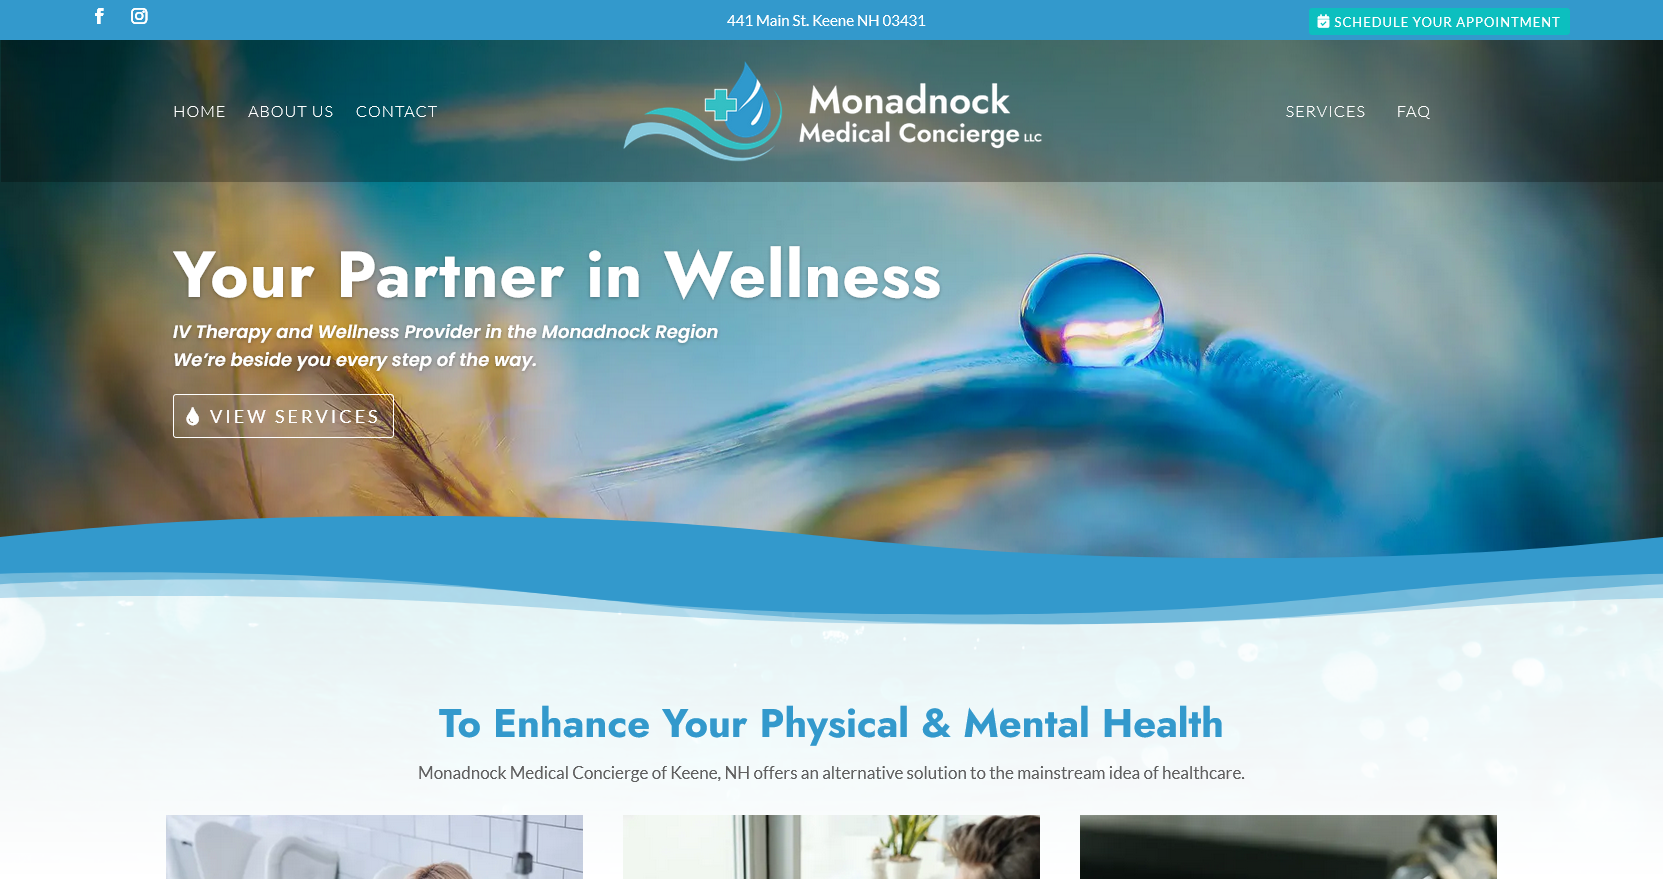 Monadnock-Medical-Concierge-IV-drips-and-therapy-in-the-Mondadnock-Region